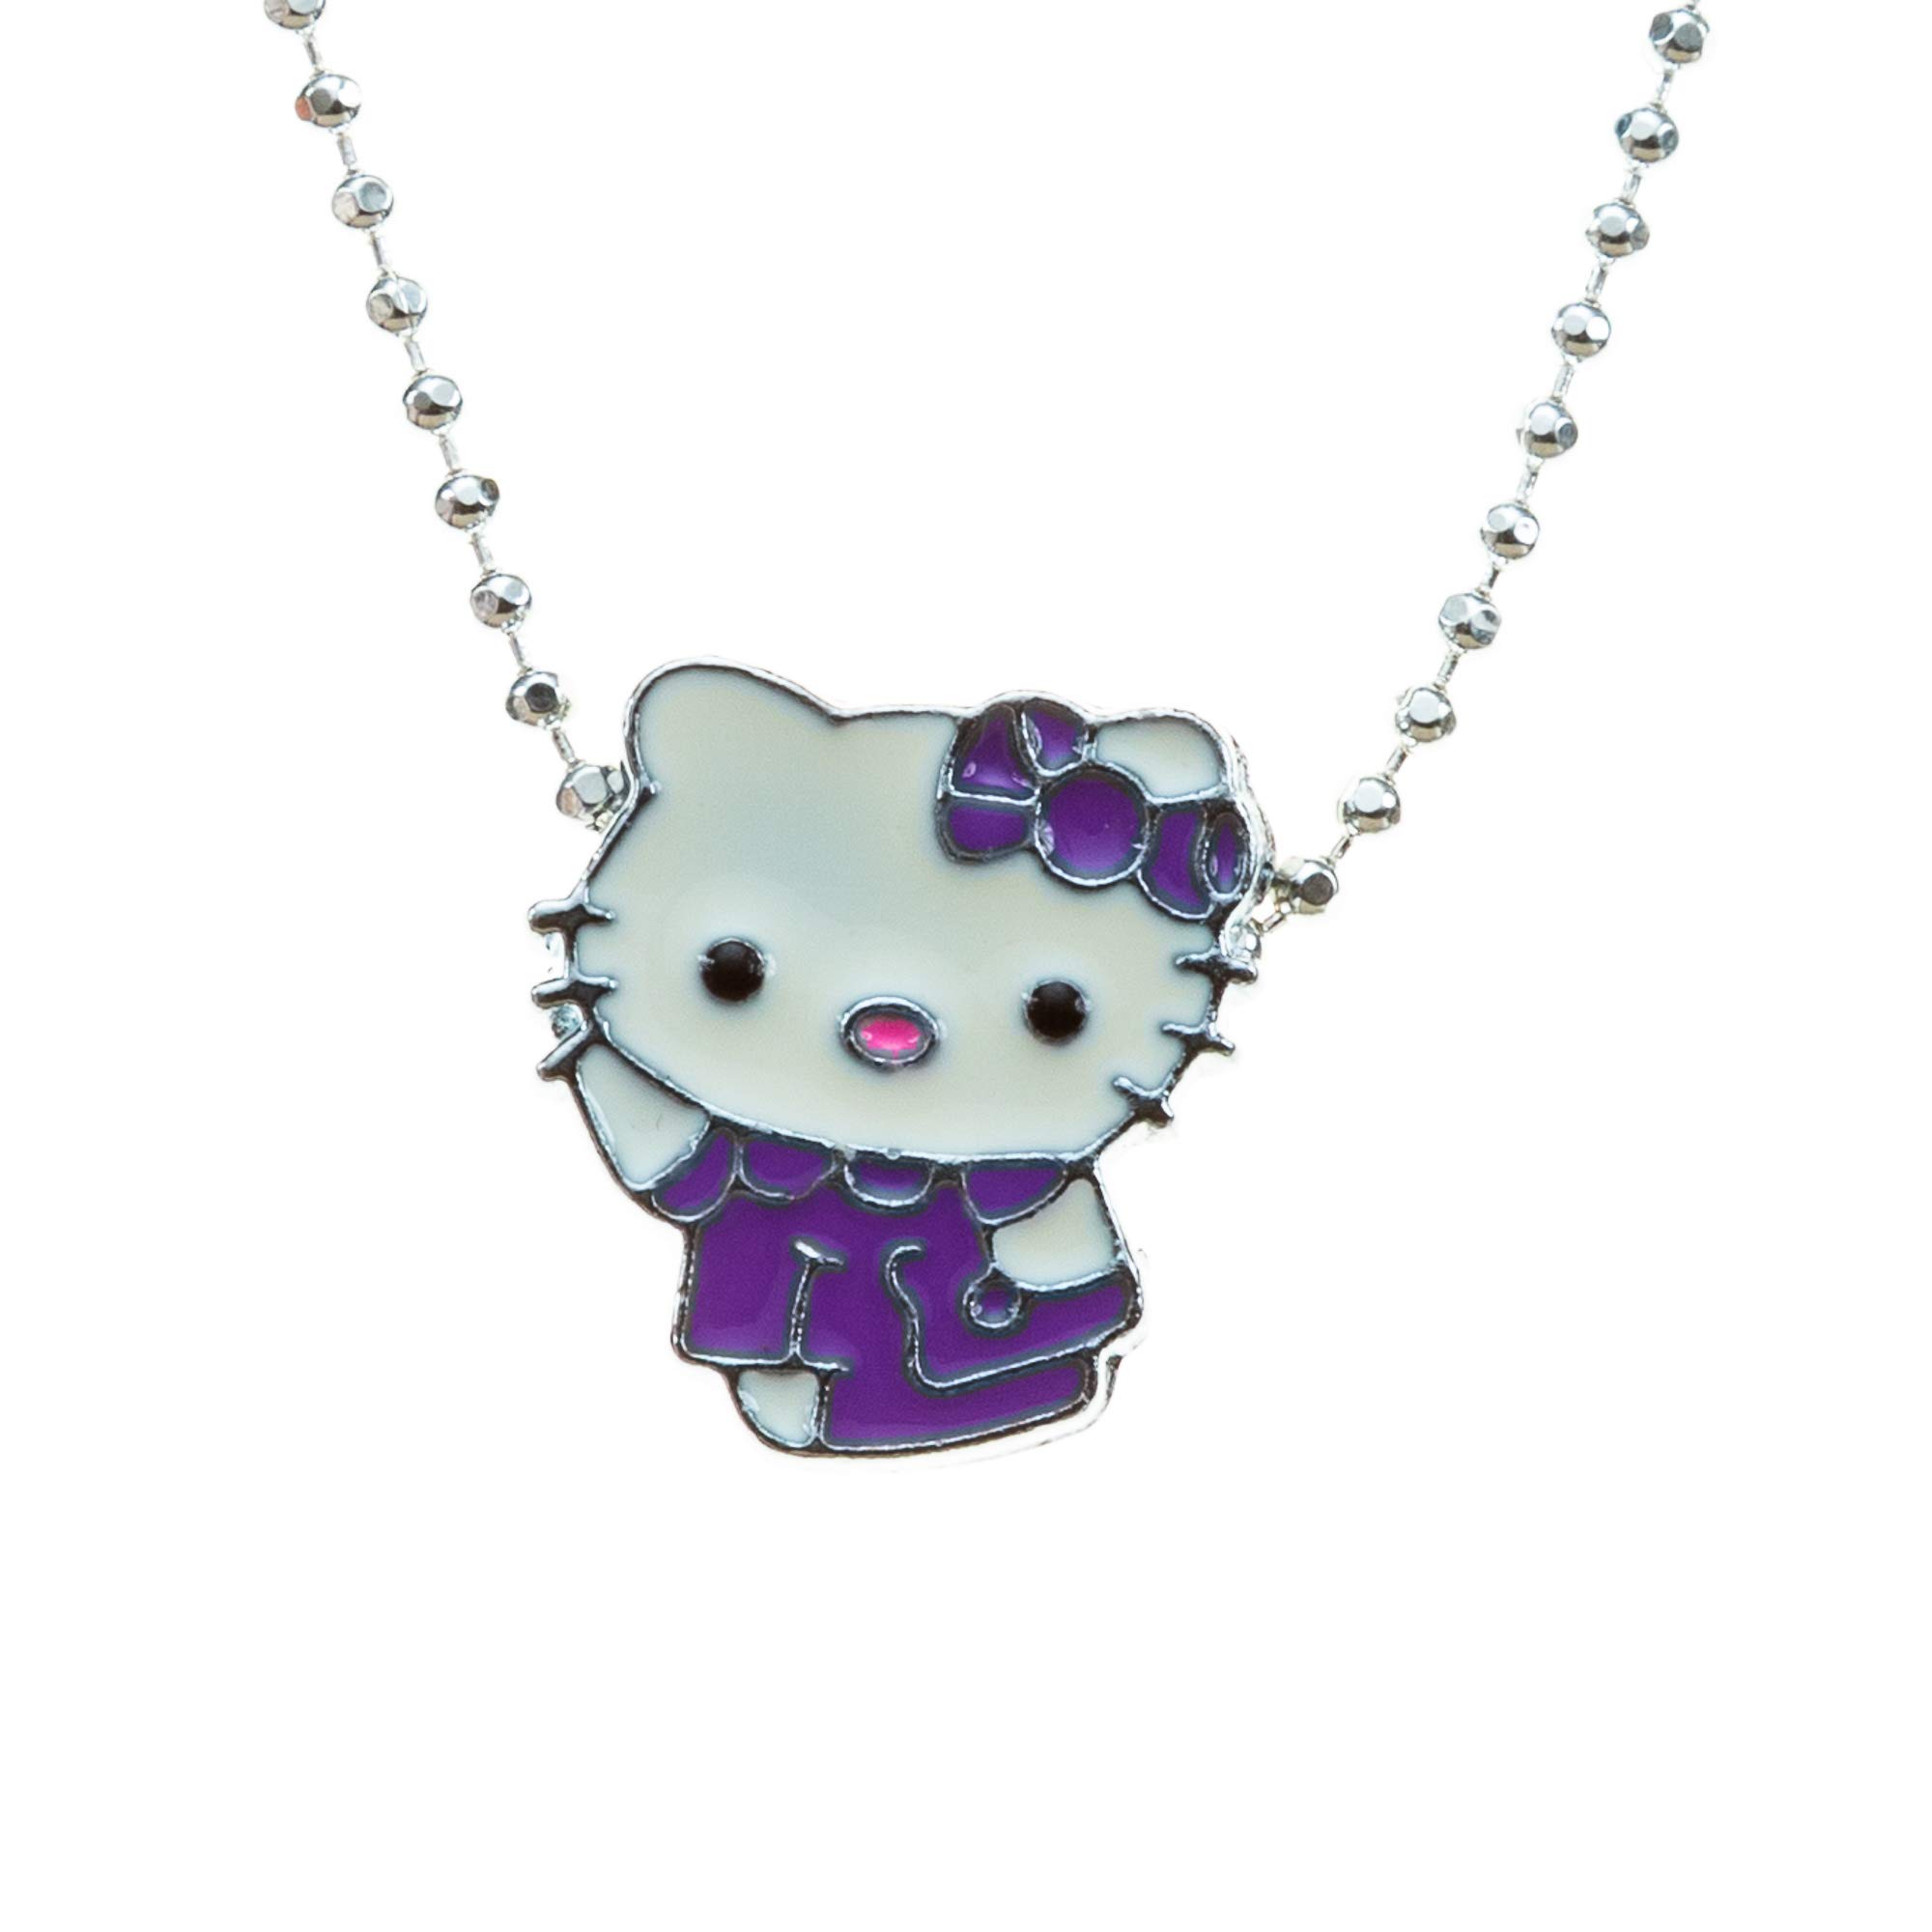 Hello Kitty Violet Purple Lavender Dress and Bowknot Enamel on Metal Happy Birthday Holidays Valentine Merry Christmas Gifts. Chain (style varies) included.